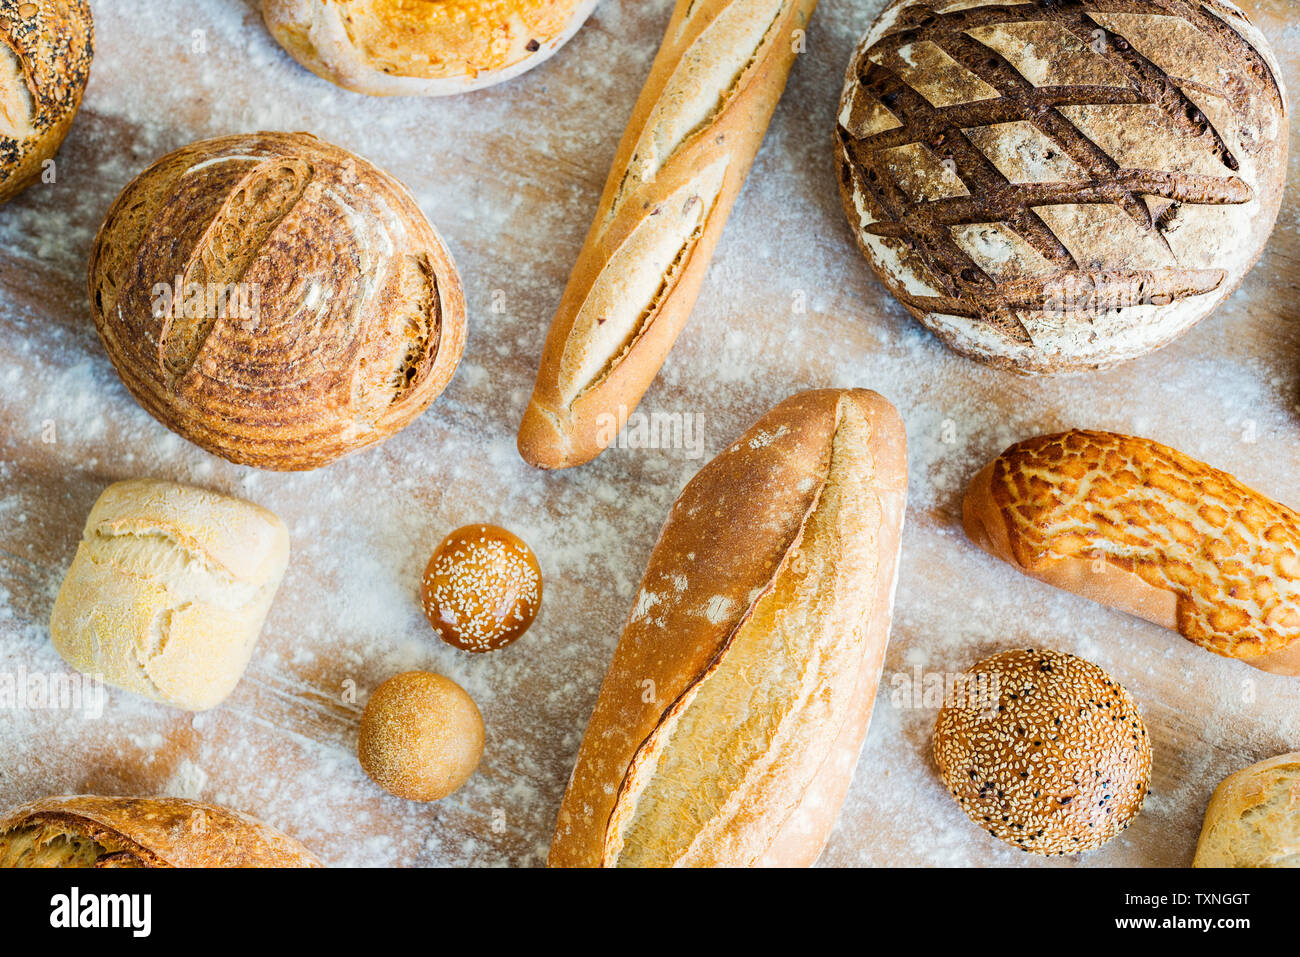 Large variety of wholemeal and white bread rolls and loaves, overhead view Stock Photo